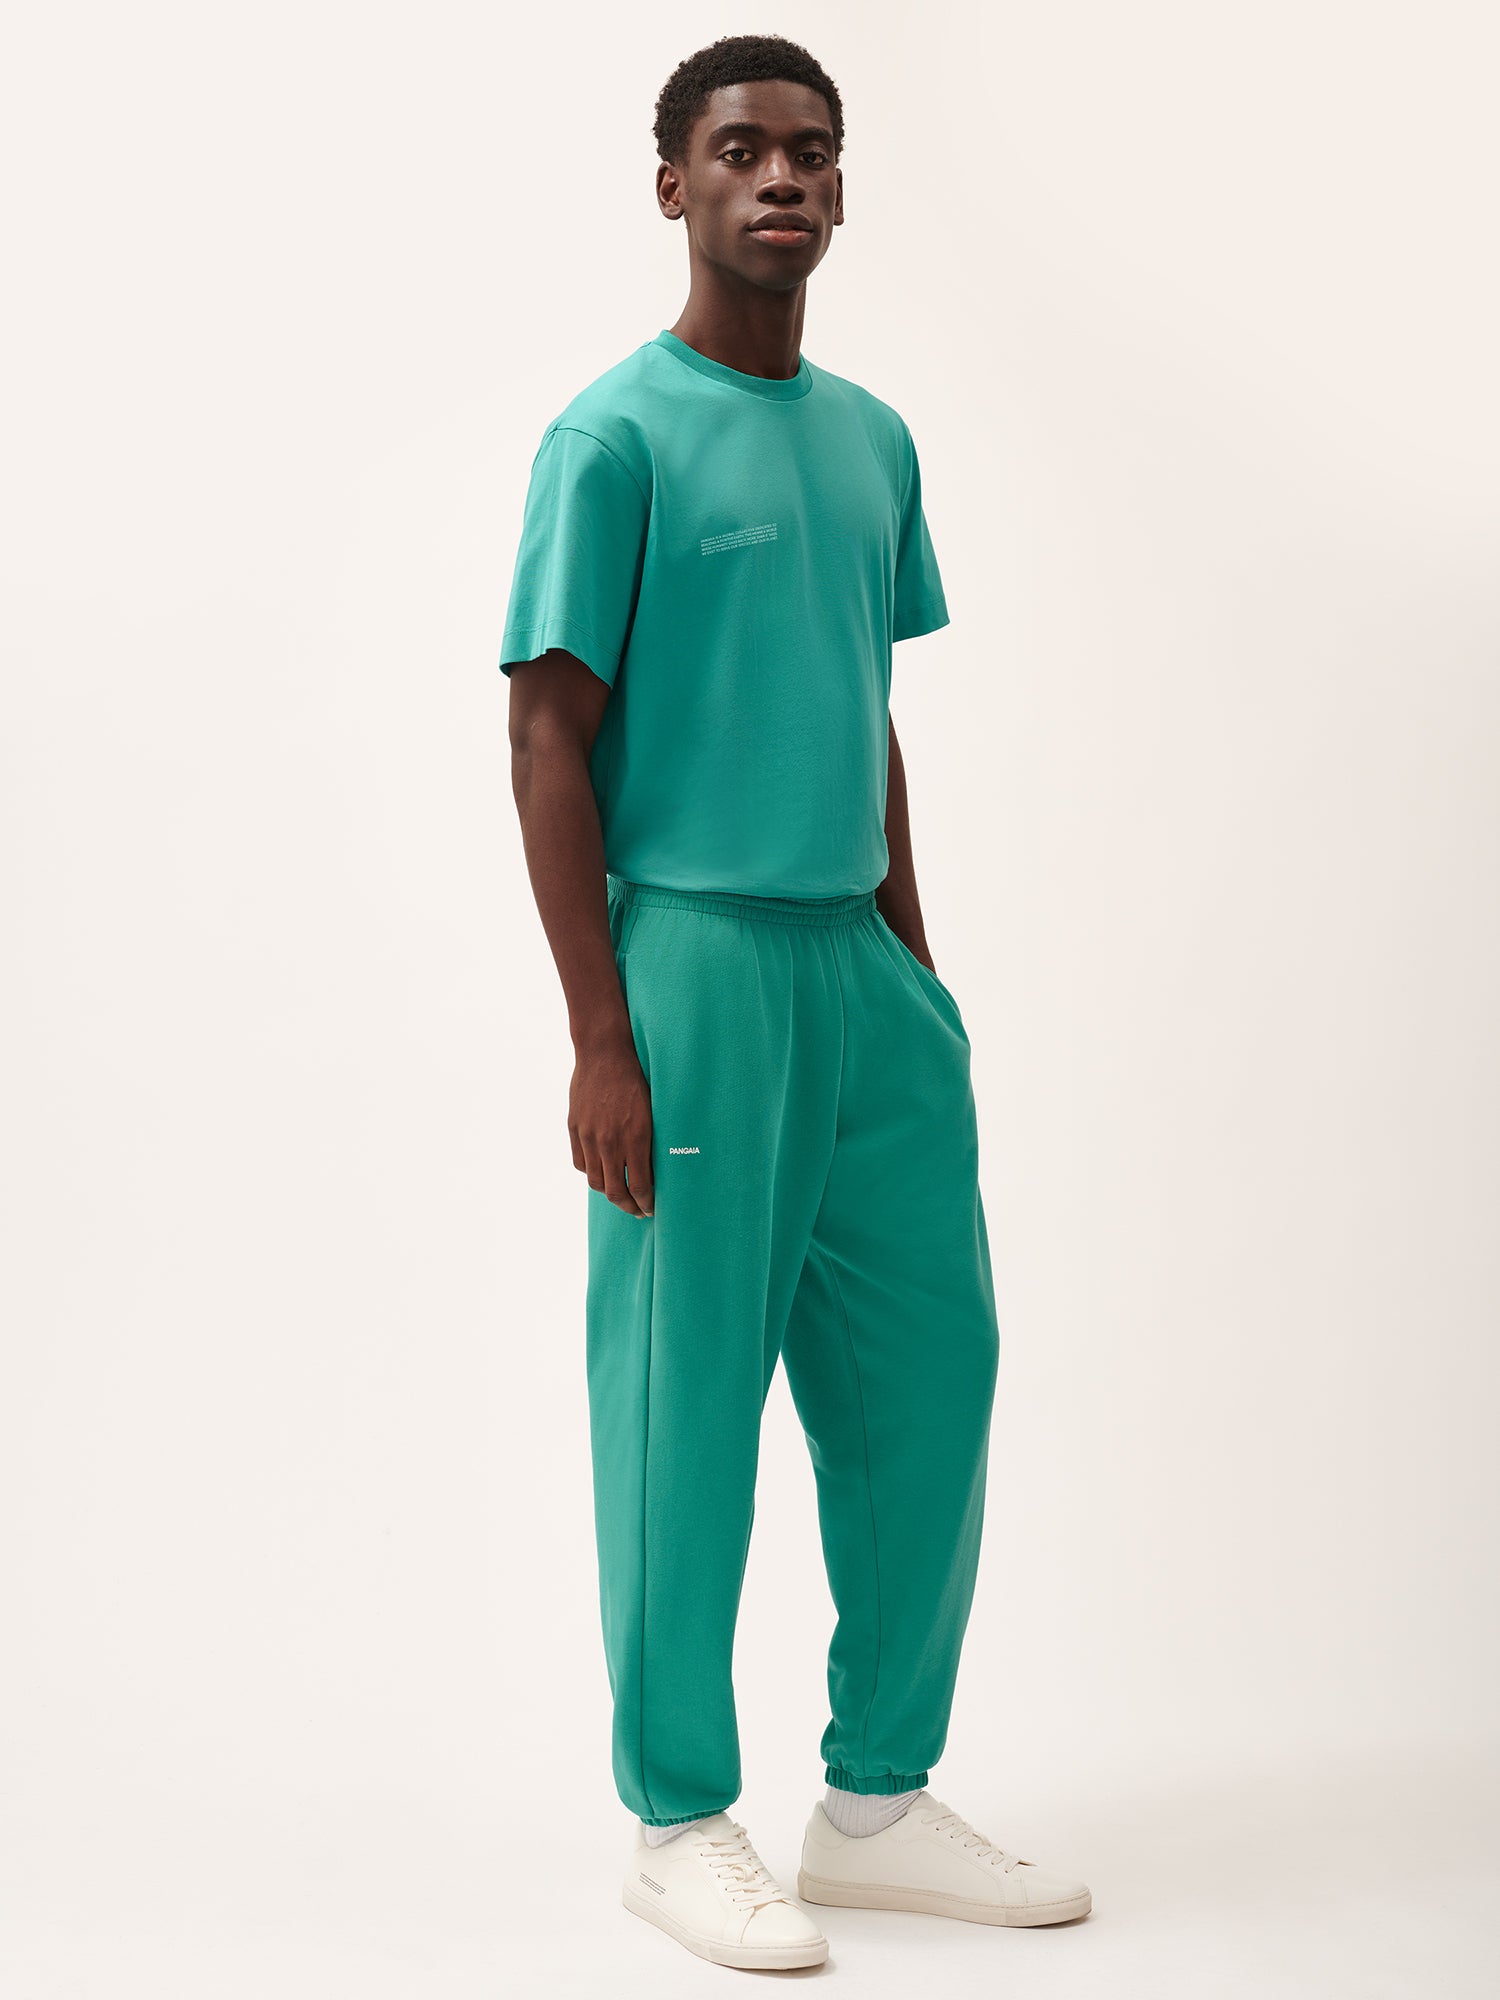 365_TrackPants_Mangrove_Turquoise_Male-1